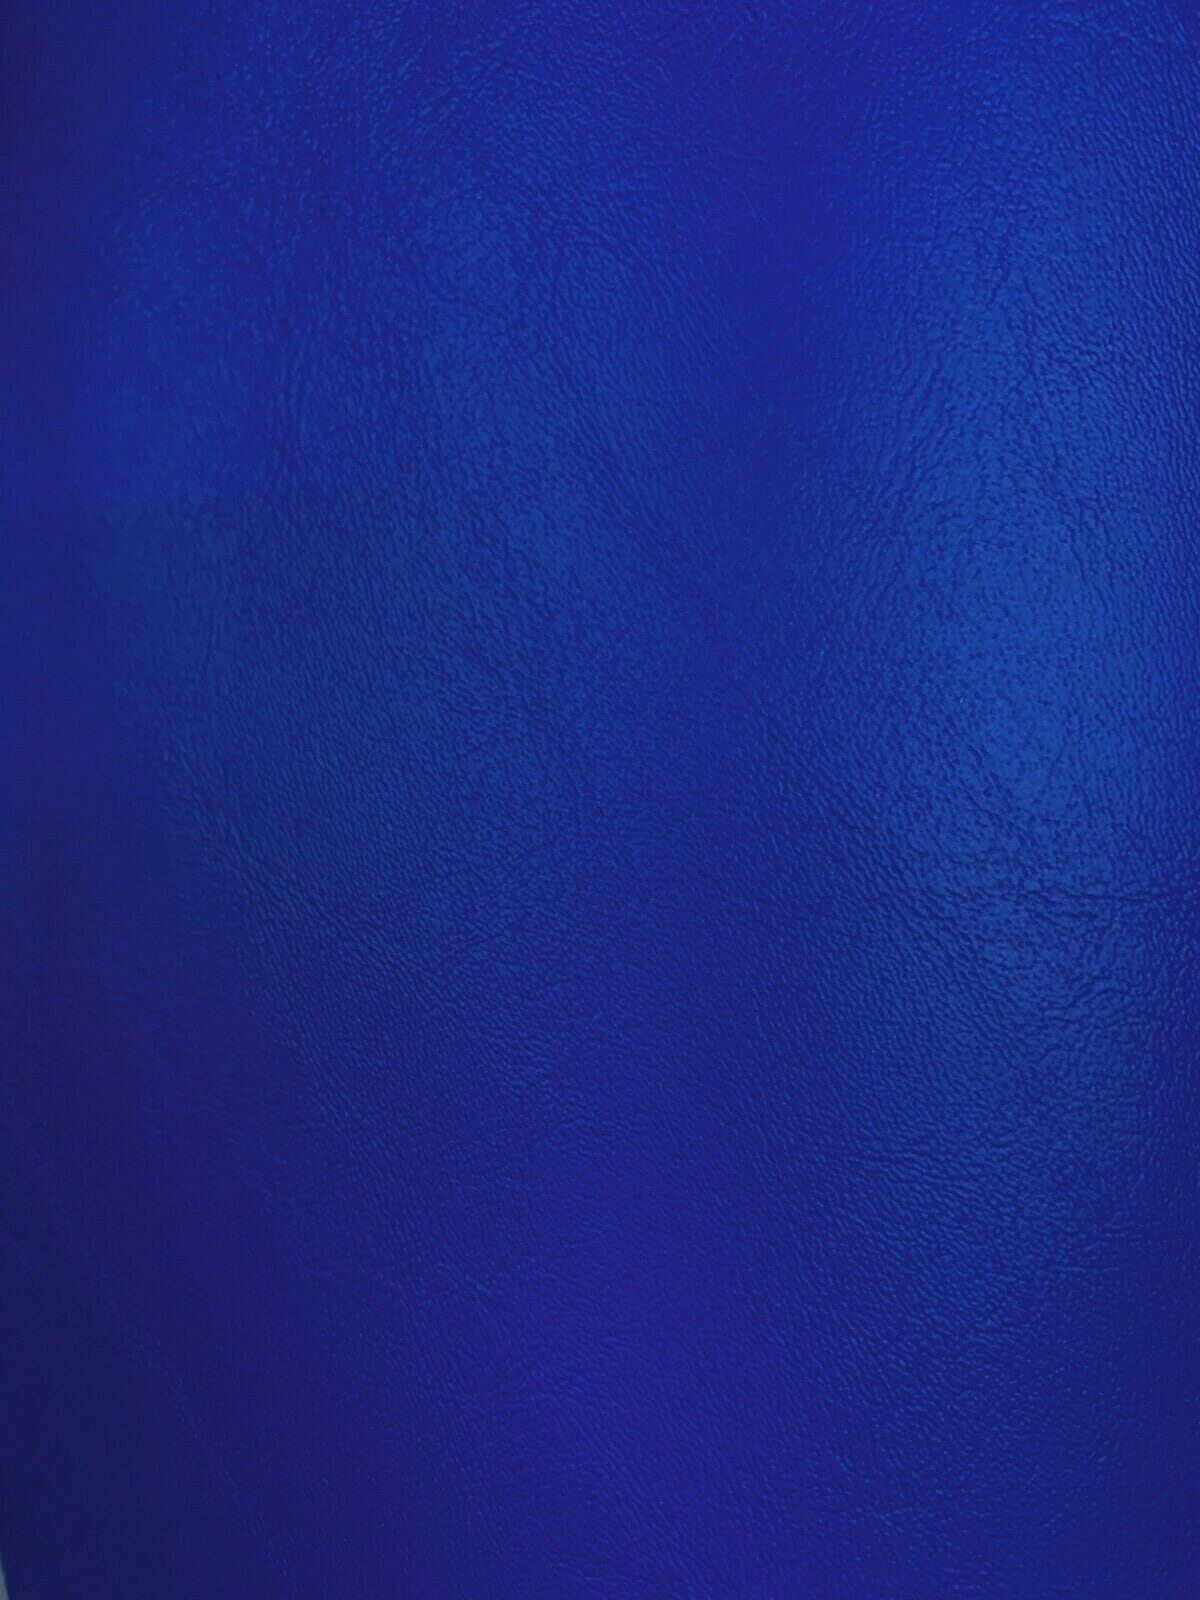 ROYAL BLUE Faux Leather Vinyl Upholstery Fabric (54 in.) Sold By The Yard